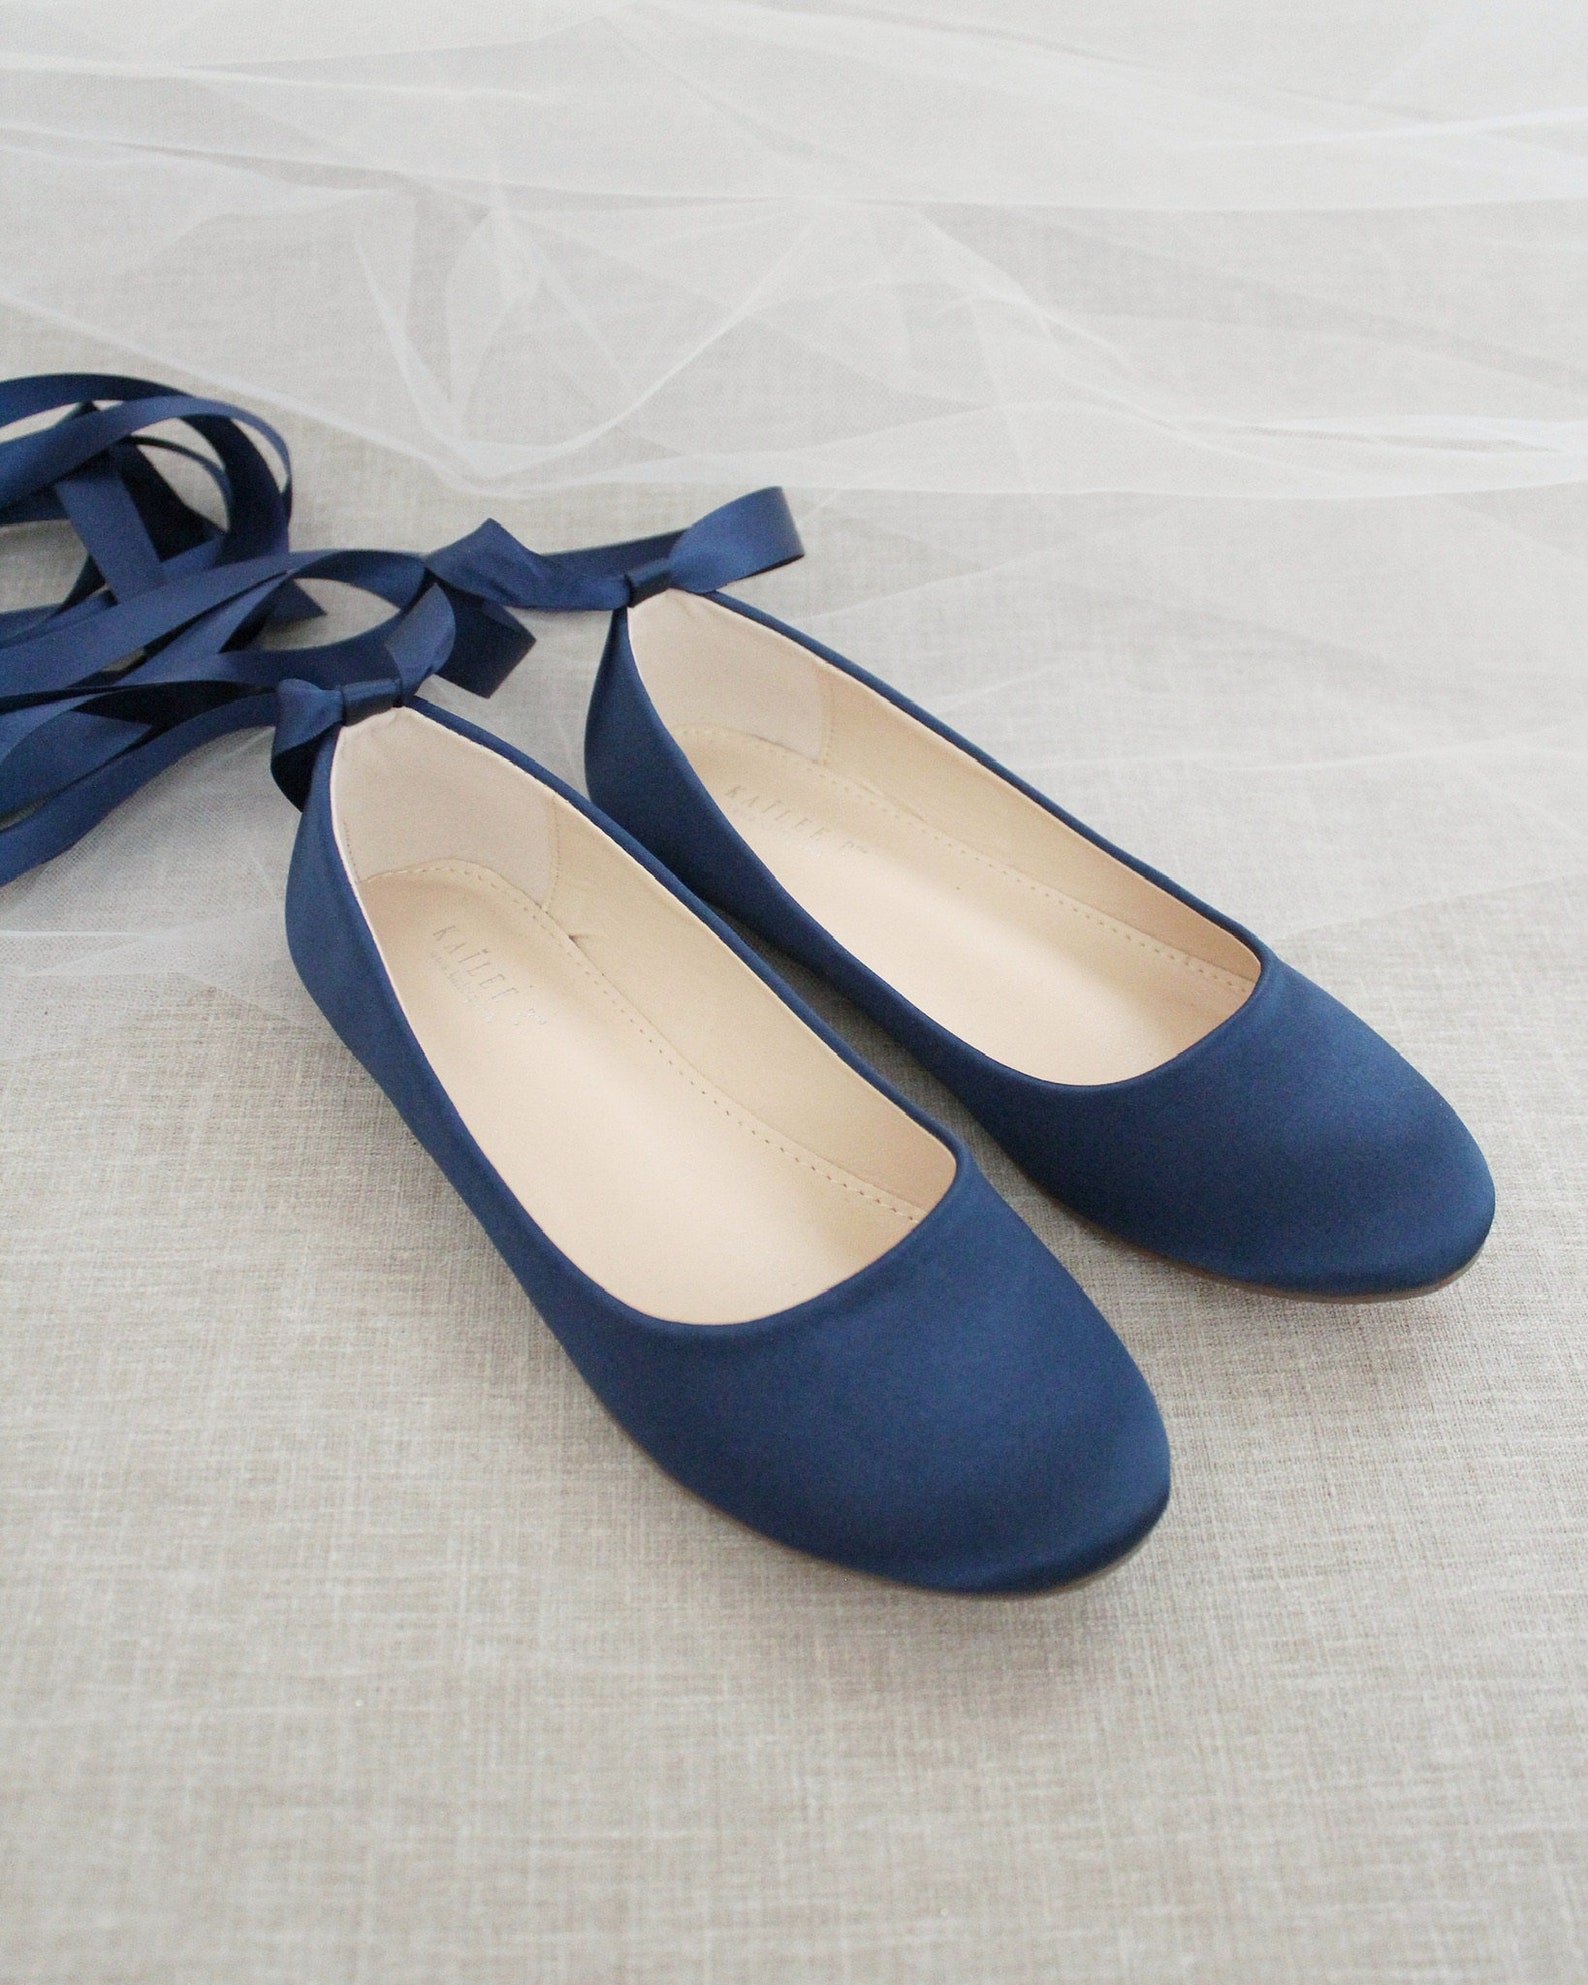 Women Shoes Navy Satin Flats With Satin Ankle Tie or - Etsy